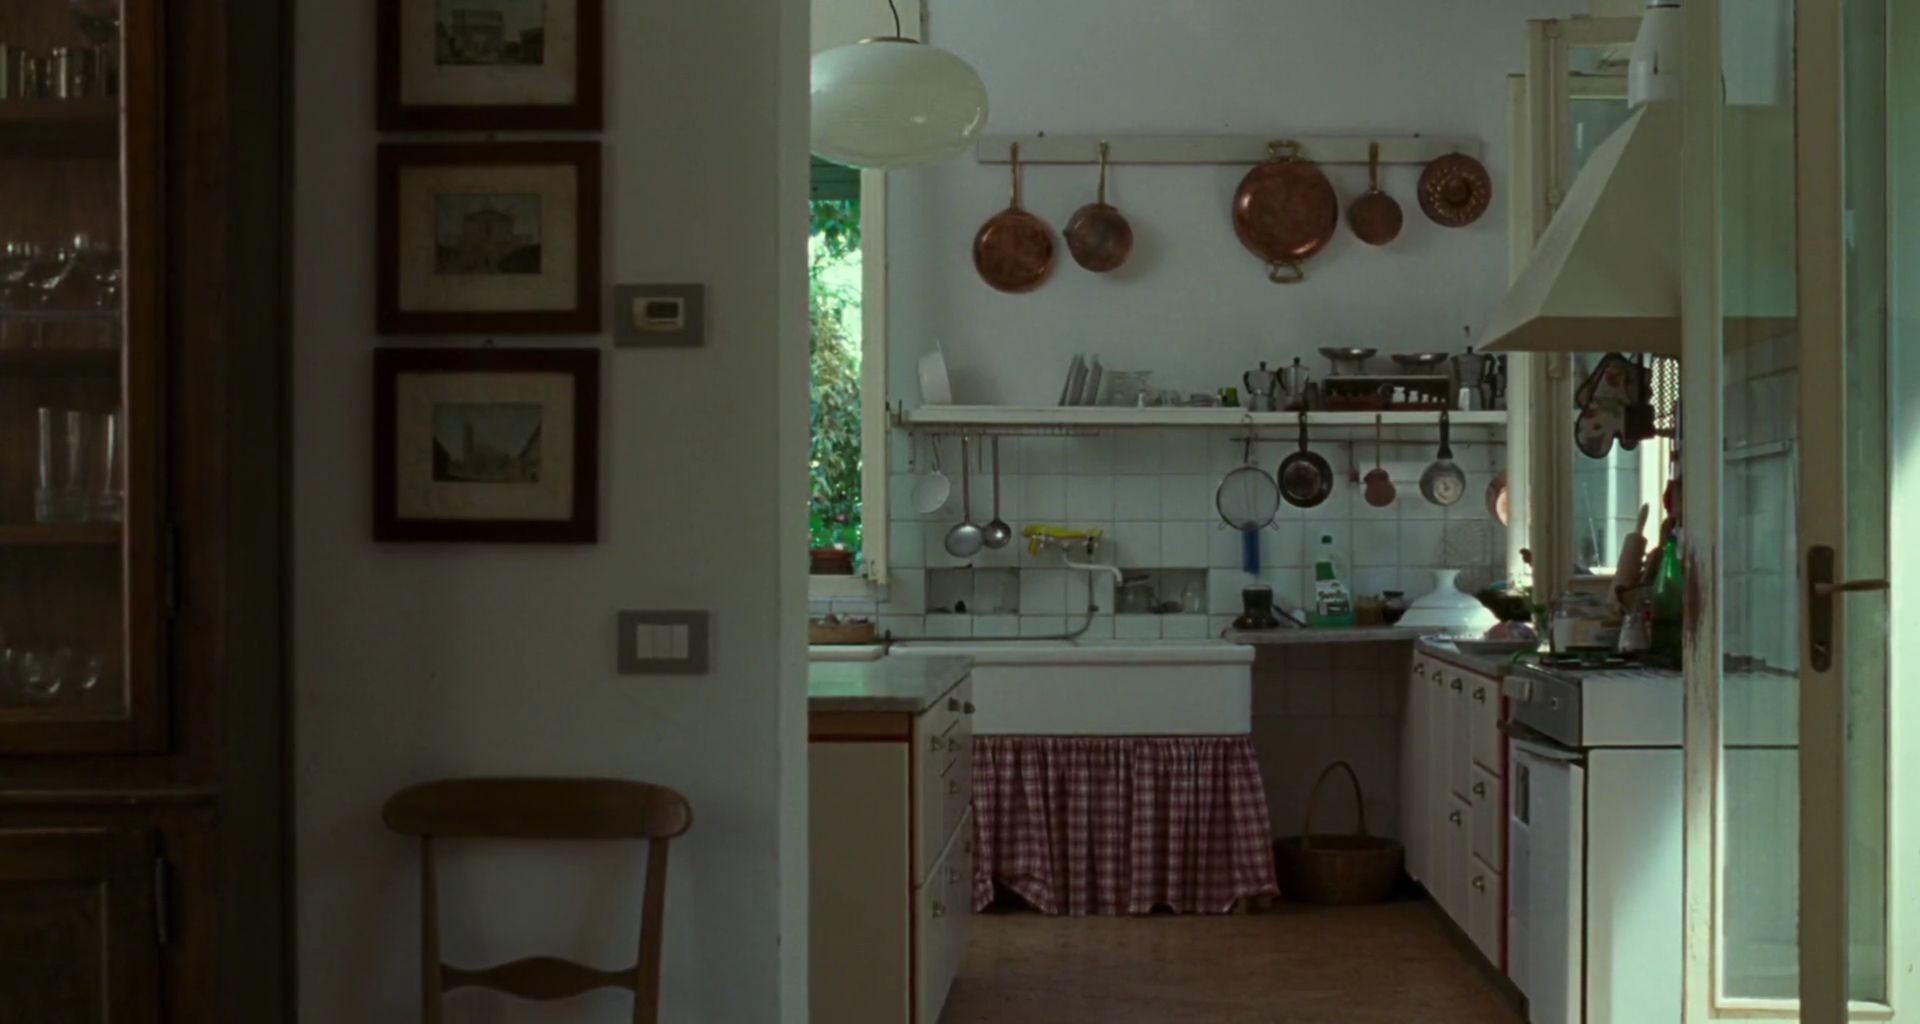 Lost In Film Film Interiors Call Me By Your Name 17 Luca Guadagnino T Co Dvnt55dij7 Twitter